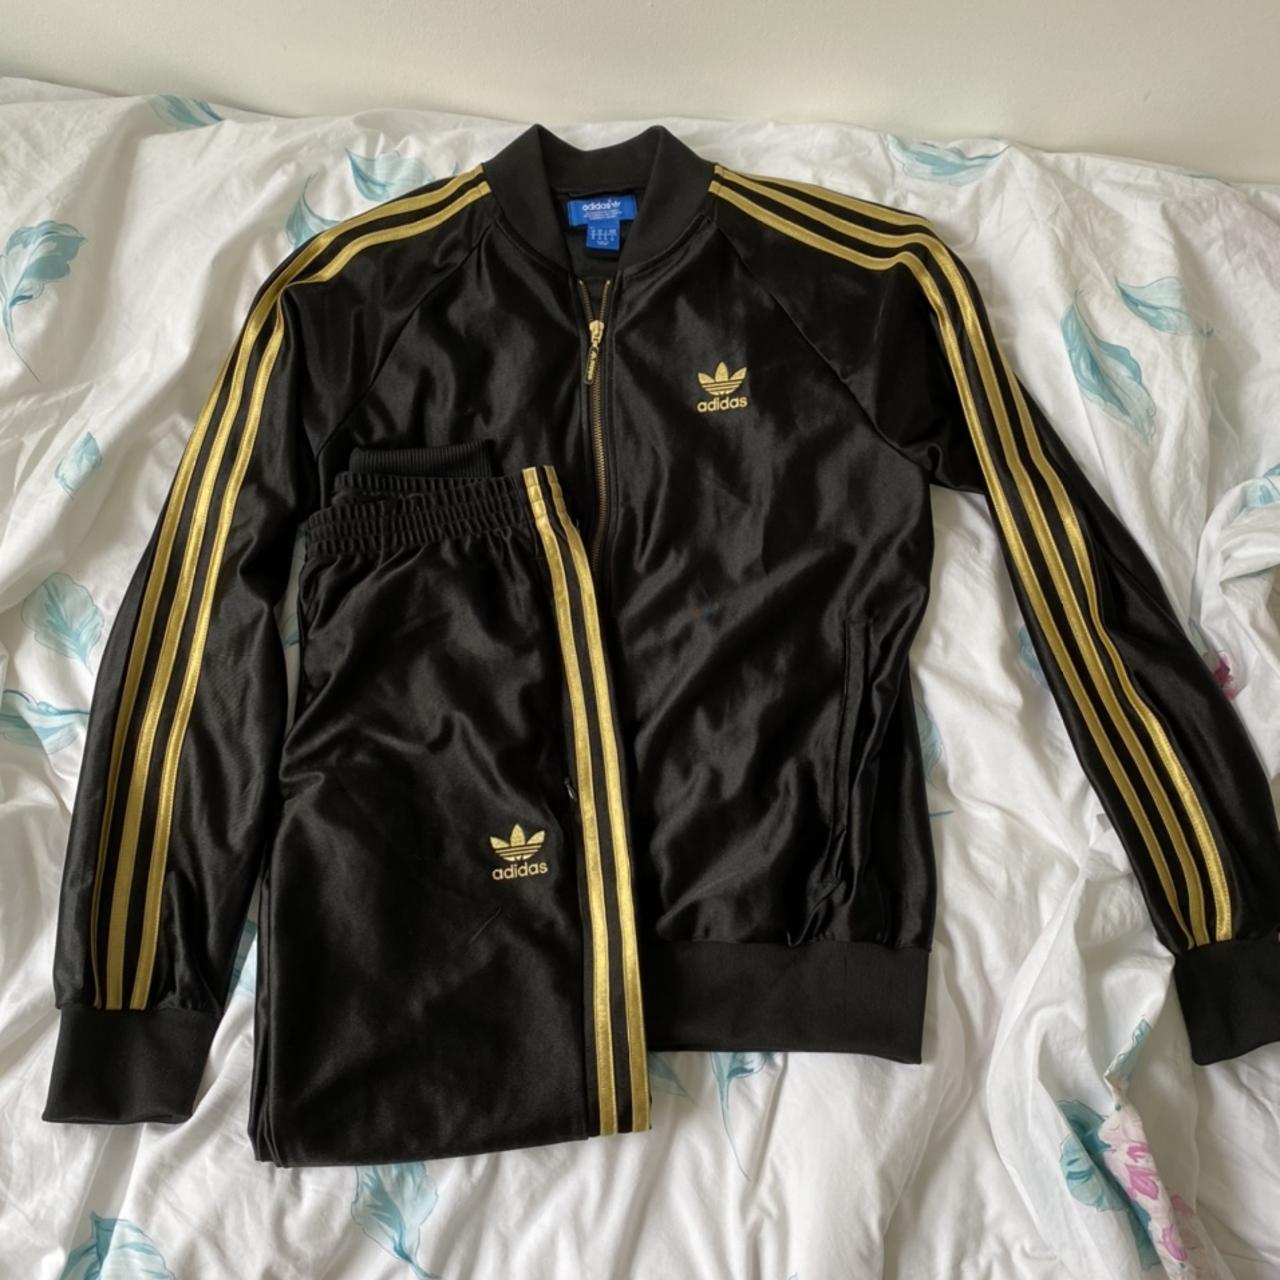 adidas-chile-62-black-gold-shiny-track-top-tracksuit-bottoms-womens.jpg